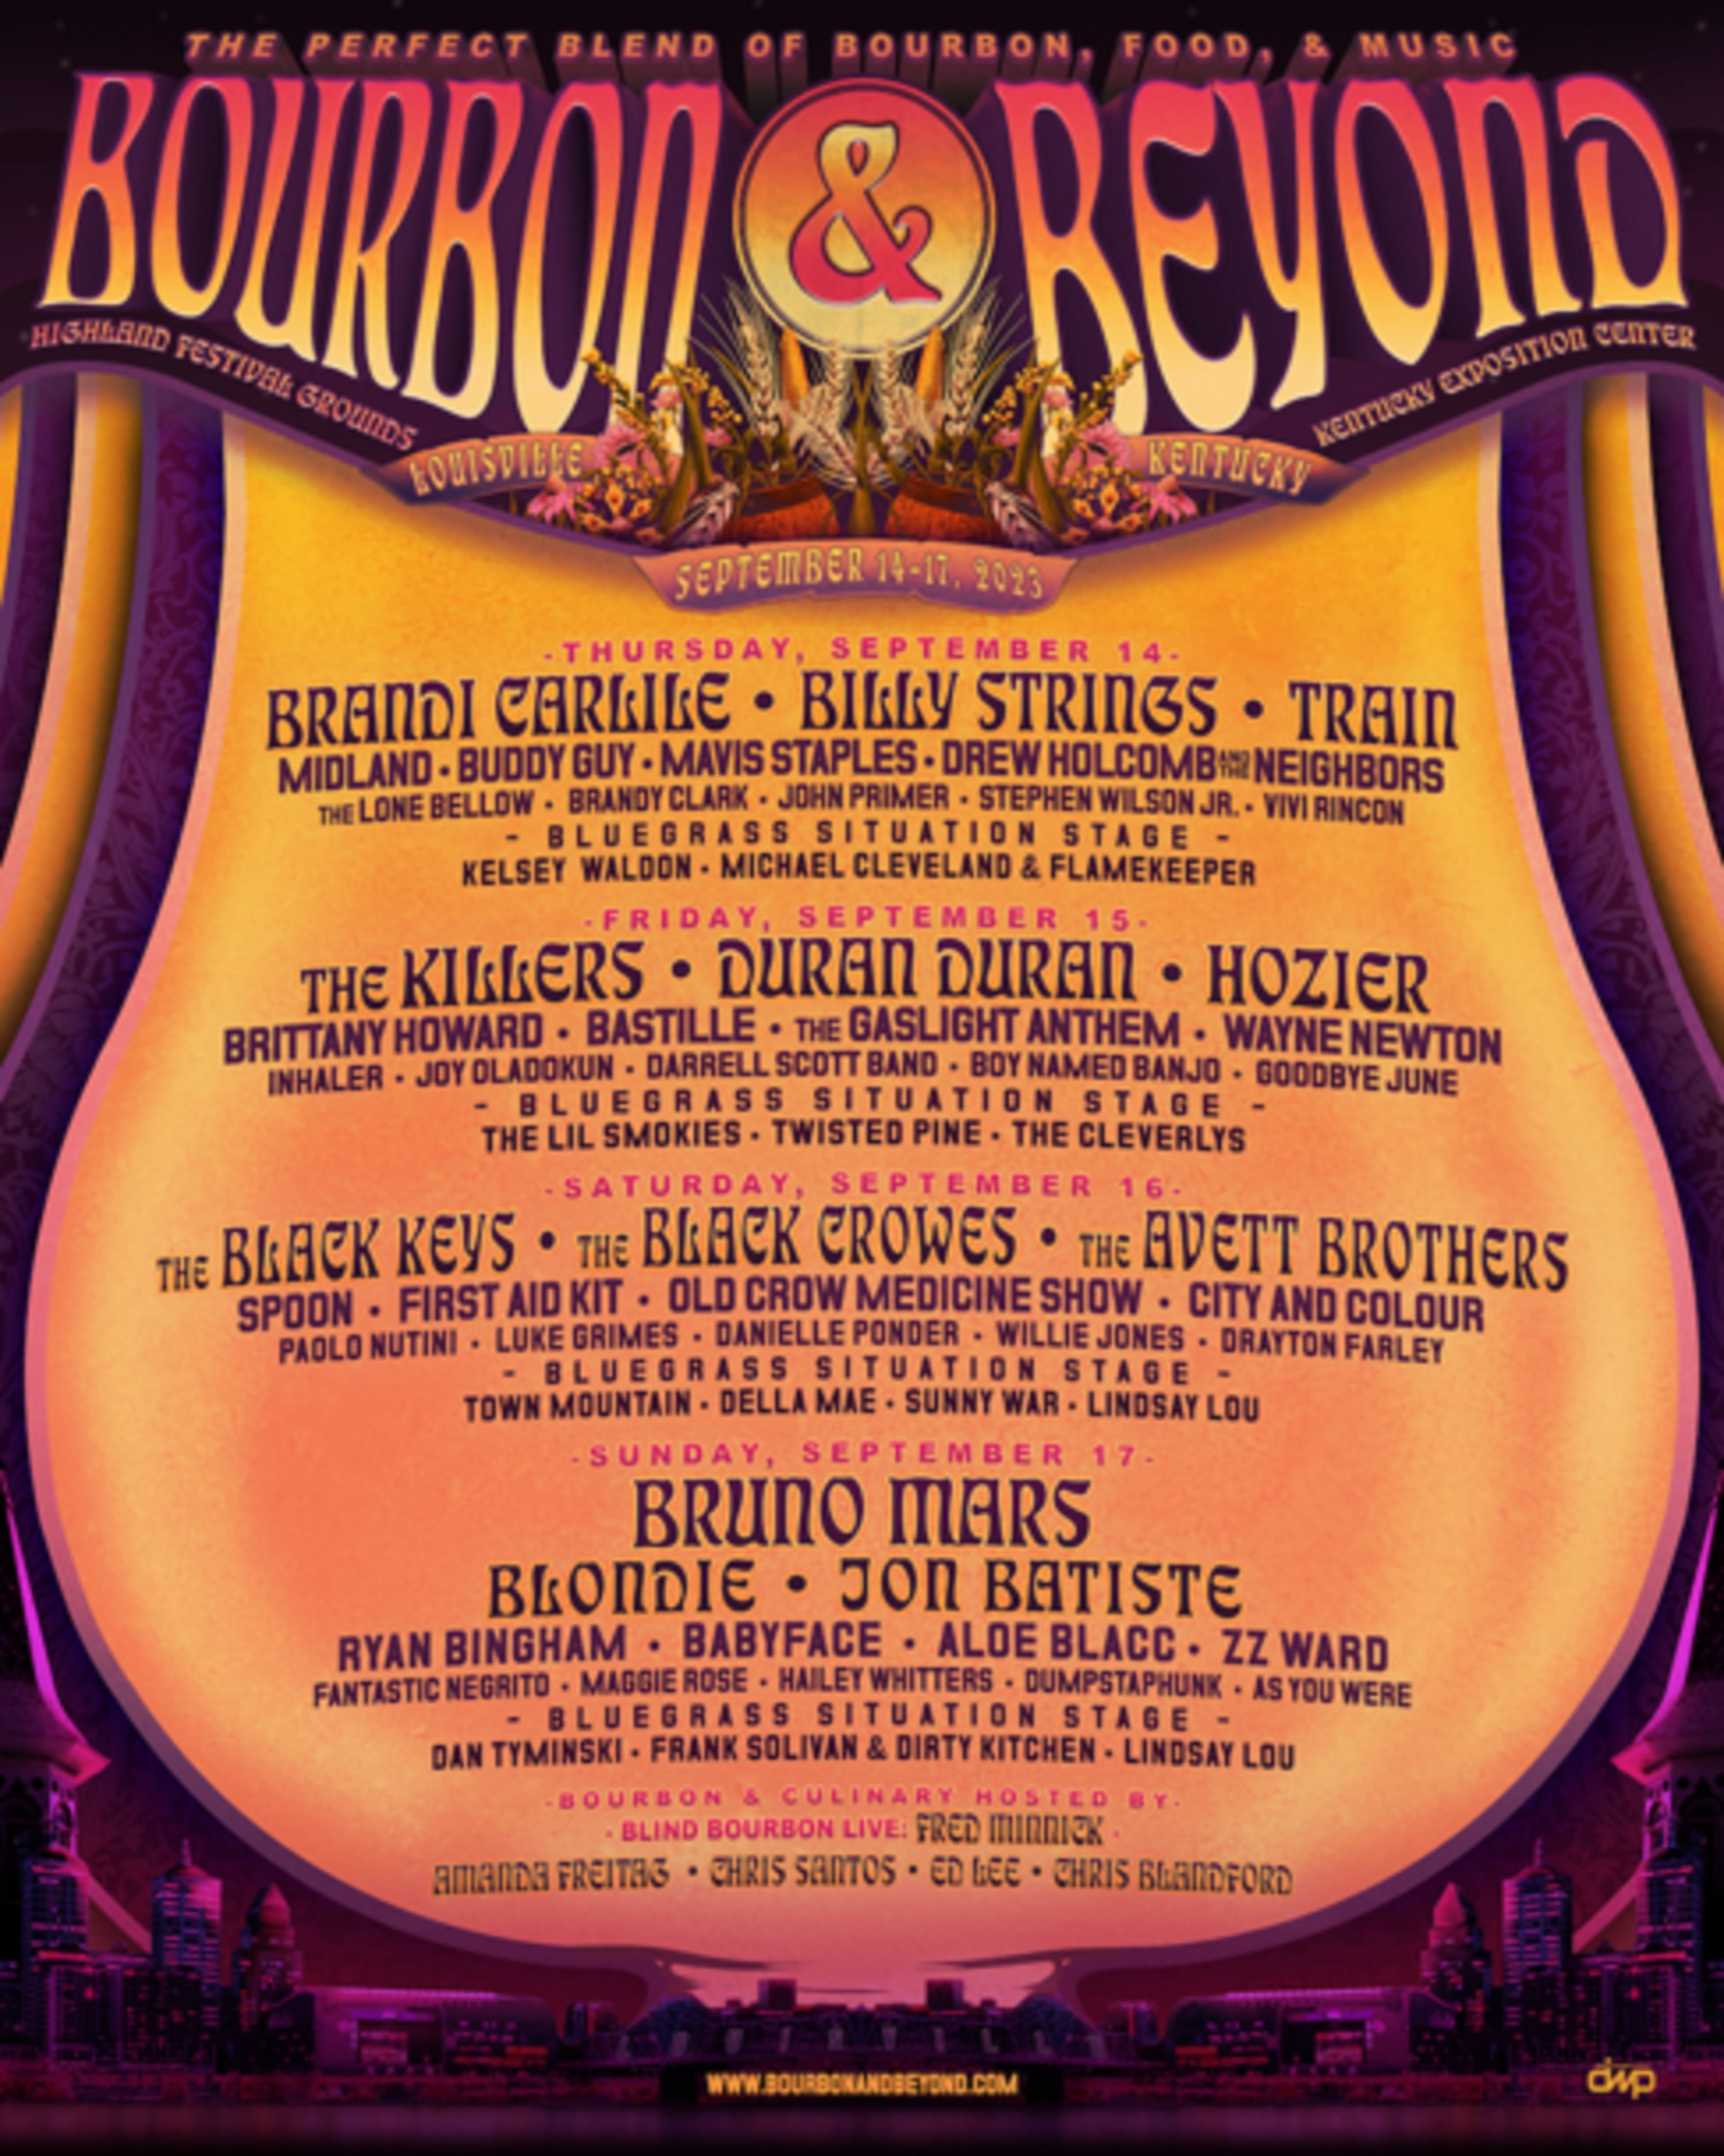 Bourbon & Beyond Returns with Billy Strings, Black Crowes, Brandi Carlile, and many more!